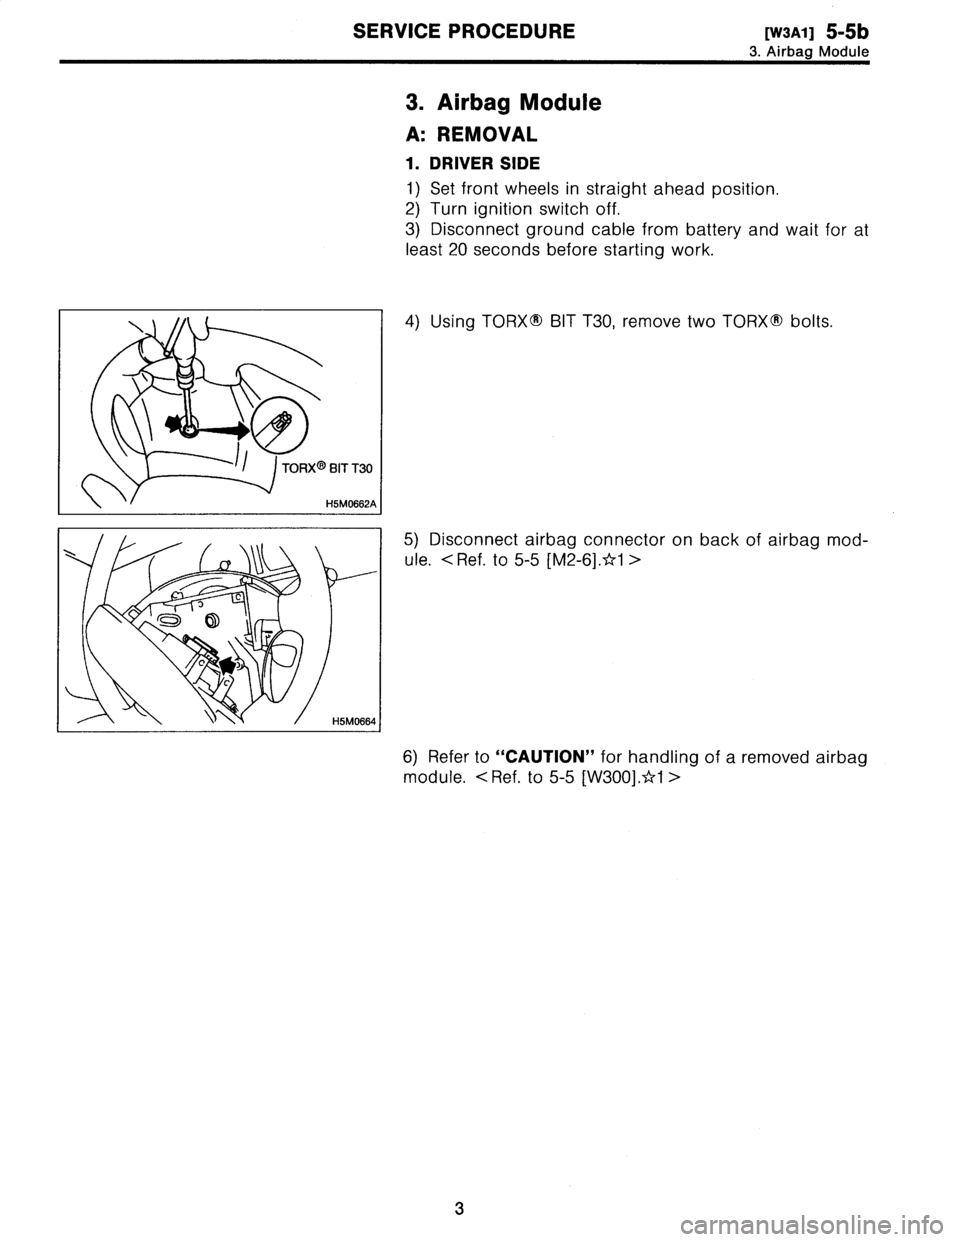 SUBARU LEGACY 1996  Service Repair Manual 
SERVICE
PROCEDURE
[w3A11
5-5b

3
.
Airbag
Module
3
.
Airbag
Module

A
:
REMOVAL

1
.
DRIVER
SIDE

1)
Set
front
wheels
in
straight
ahead
position
.

2)
Turn
ignition
switch
off
.

3)
Disconnect
ground